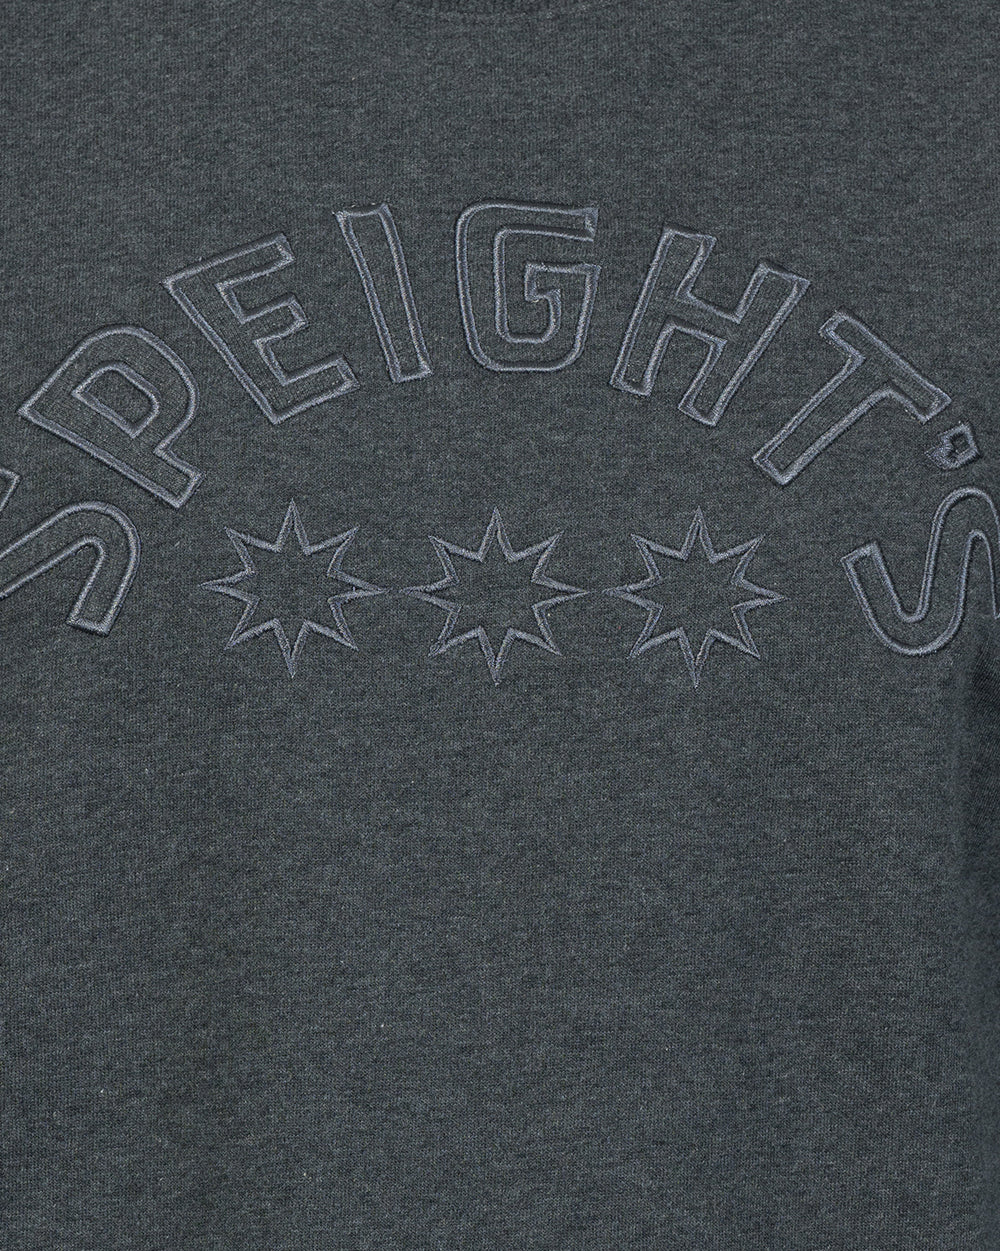 Speight's Crew Sweater -  Beer Gear Apparel & Merchandise - Speights - Lion Red - VB - Tokyo Dy merch